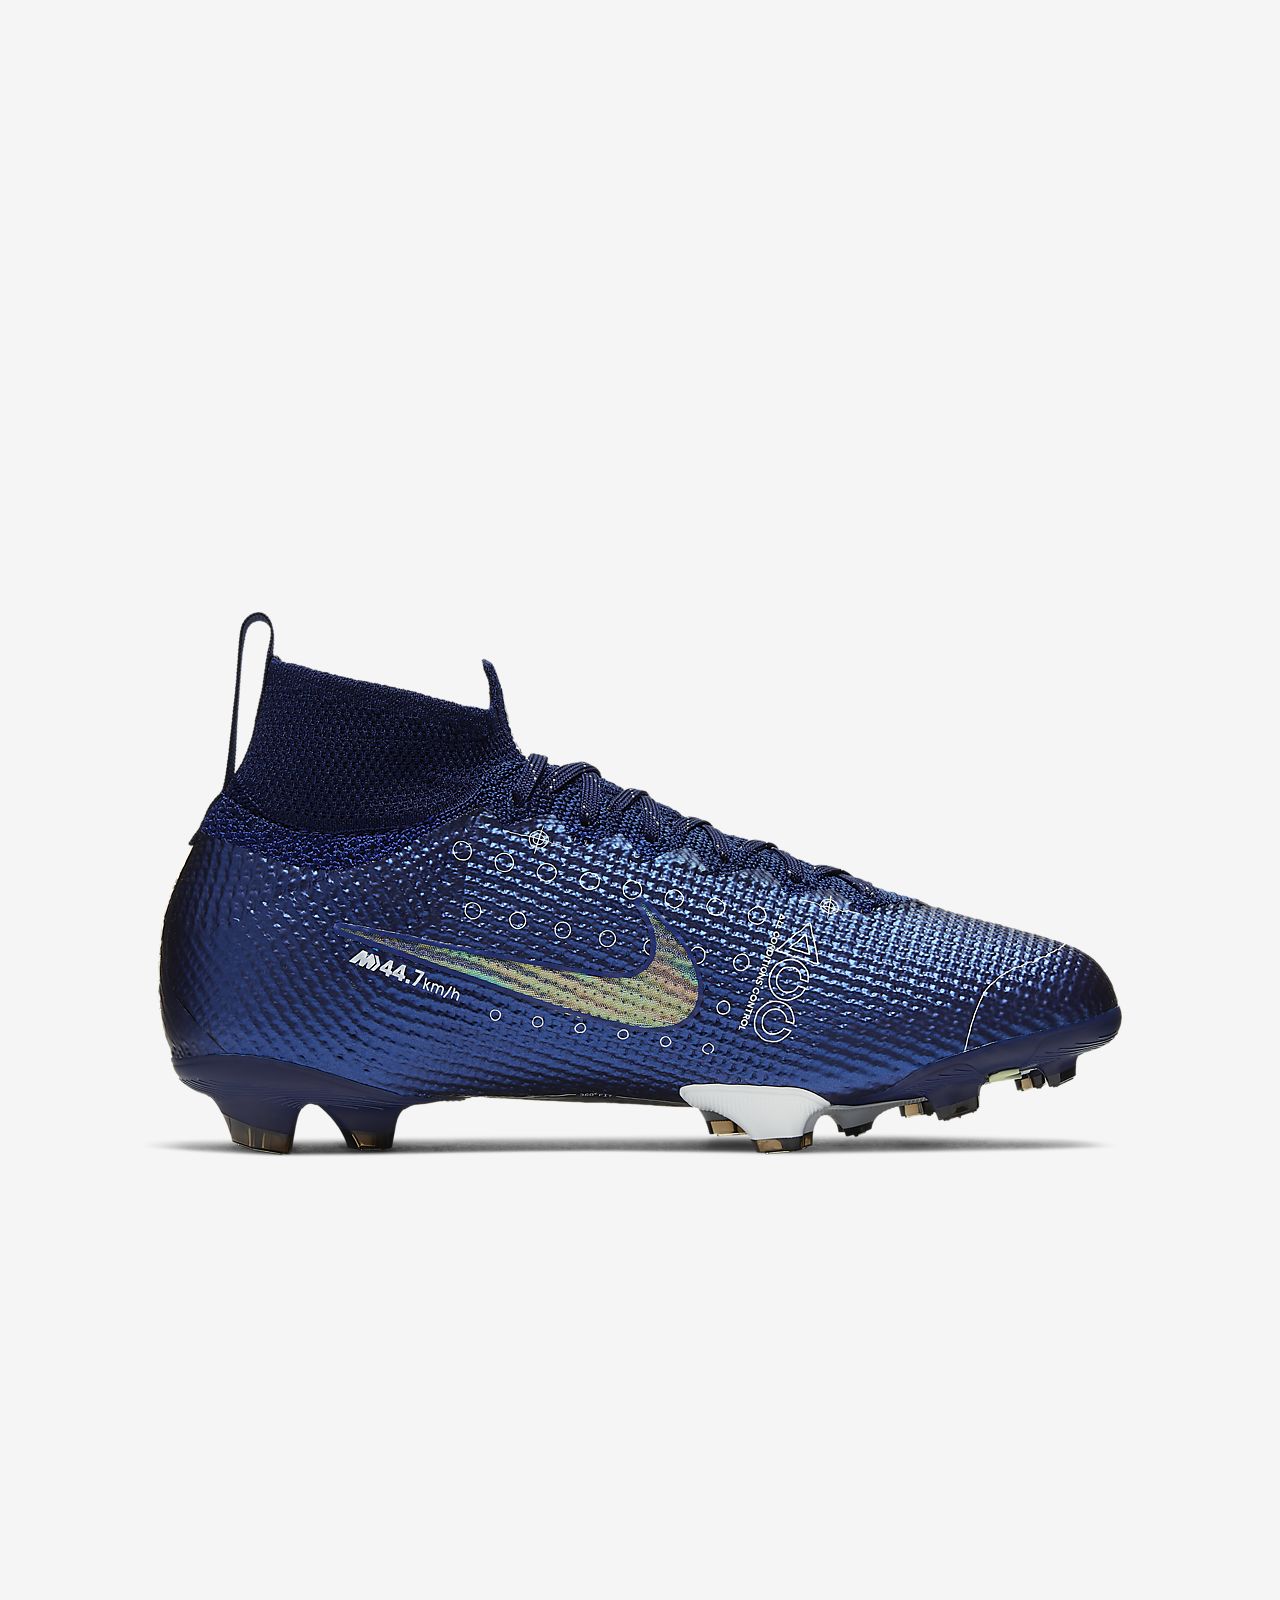 Details about Nike Mercurial Superfly 7 Elite MDS FG.